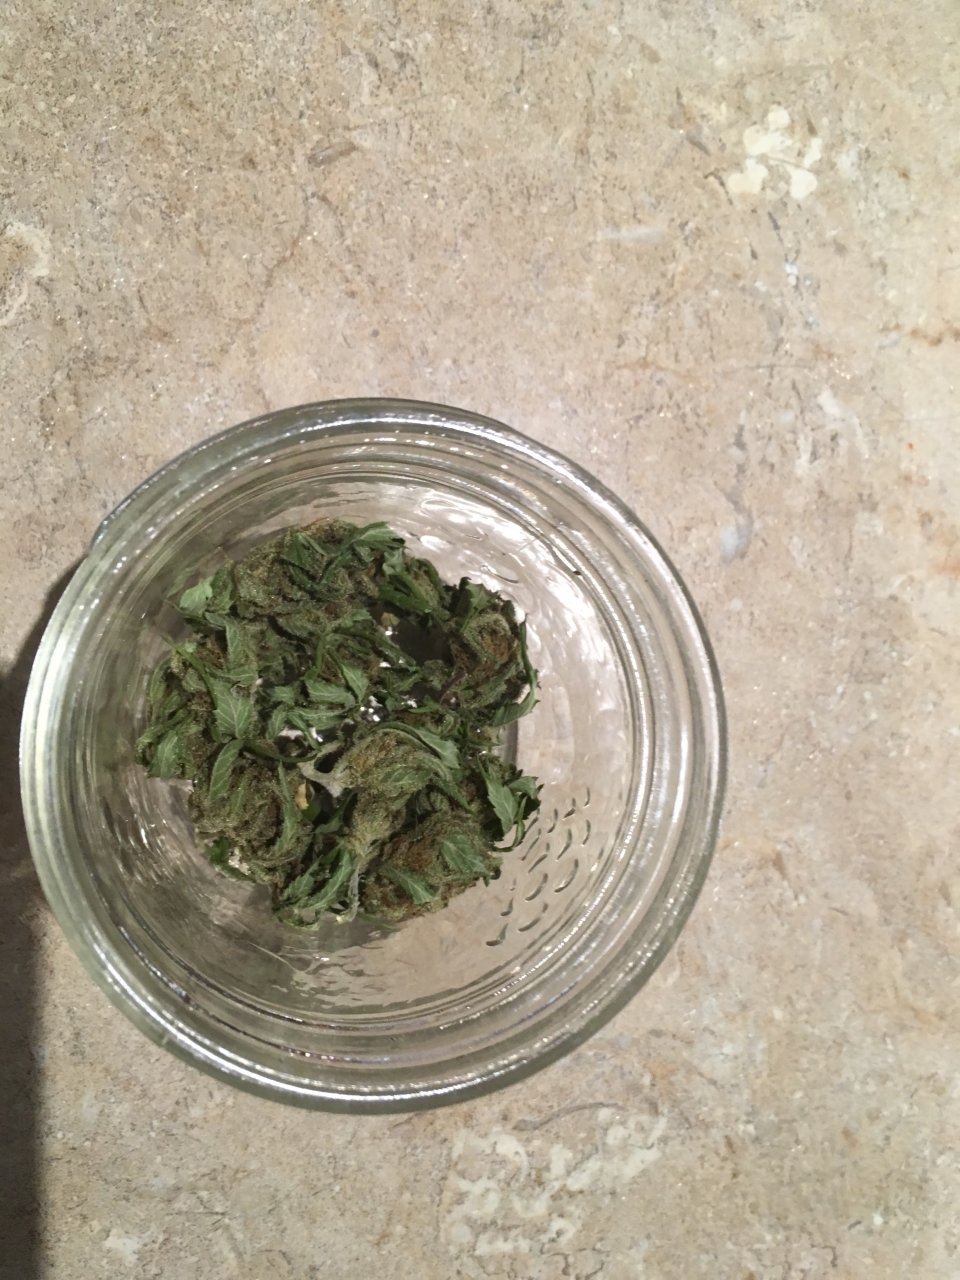 Little jar with whole buds